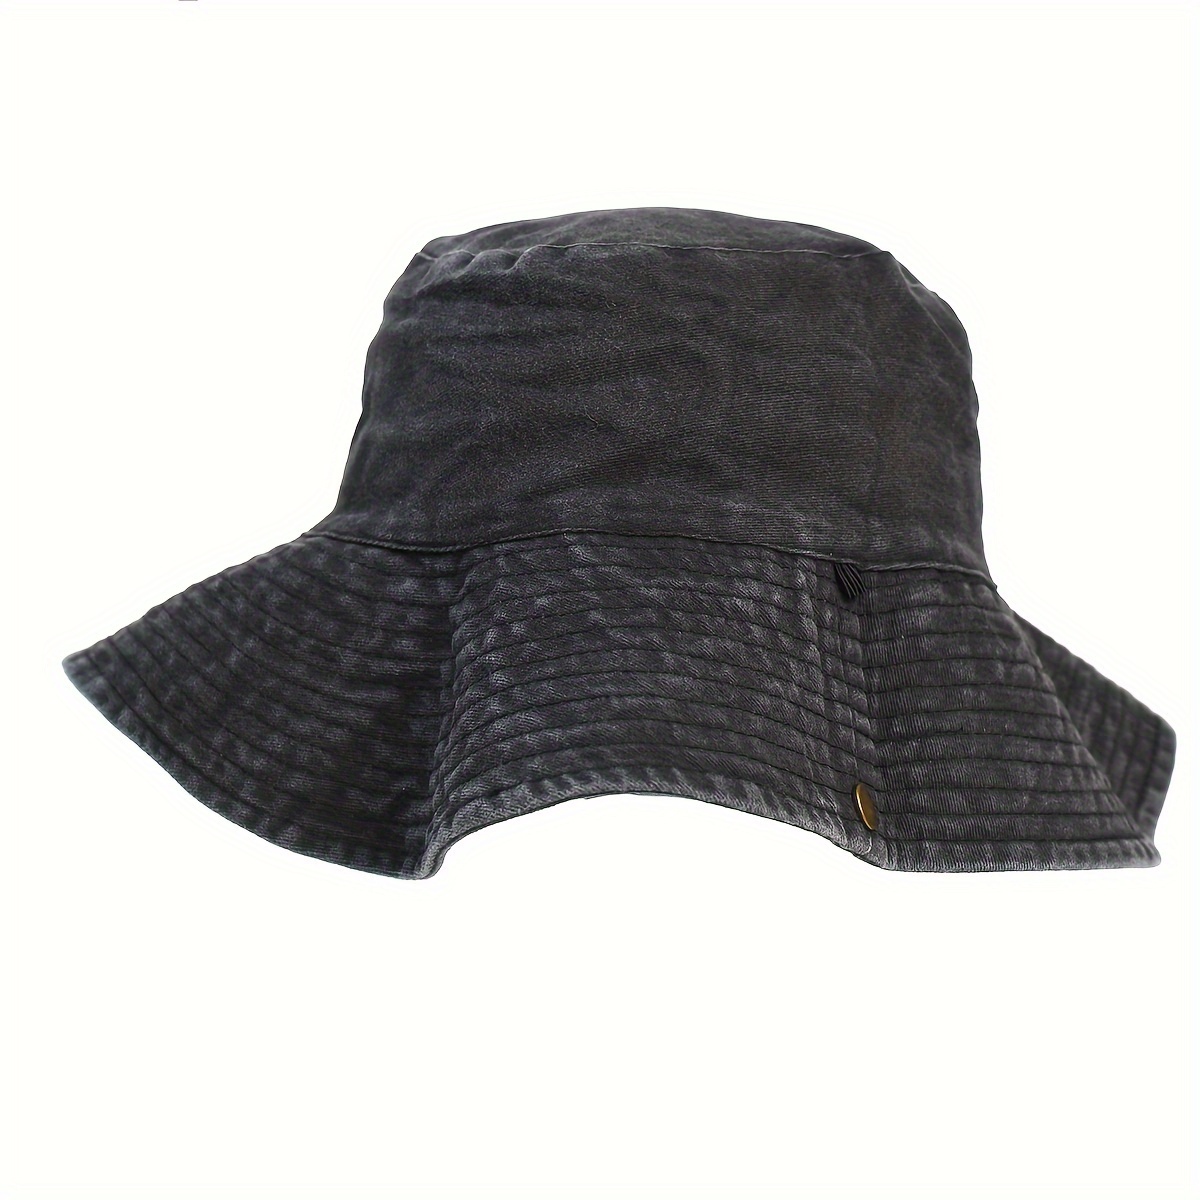 Washed Cotton Boonie Hat With Adjustable Chin Strap For Outdoor Fishing And  Hunting Unisex, Check Out Today's Deals Now